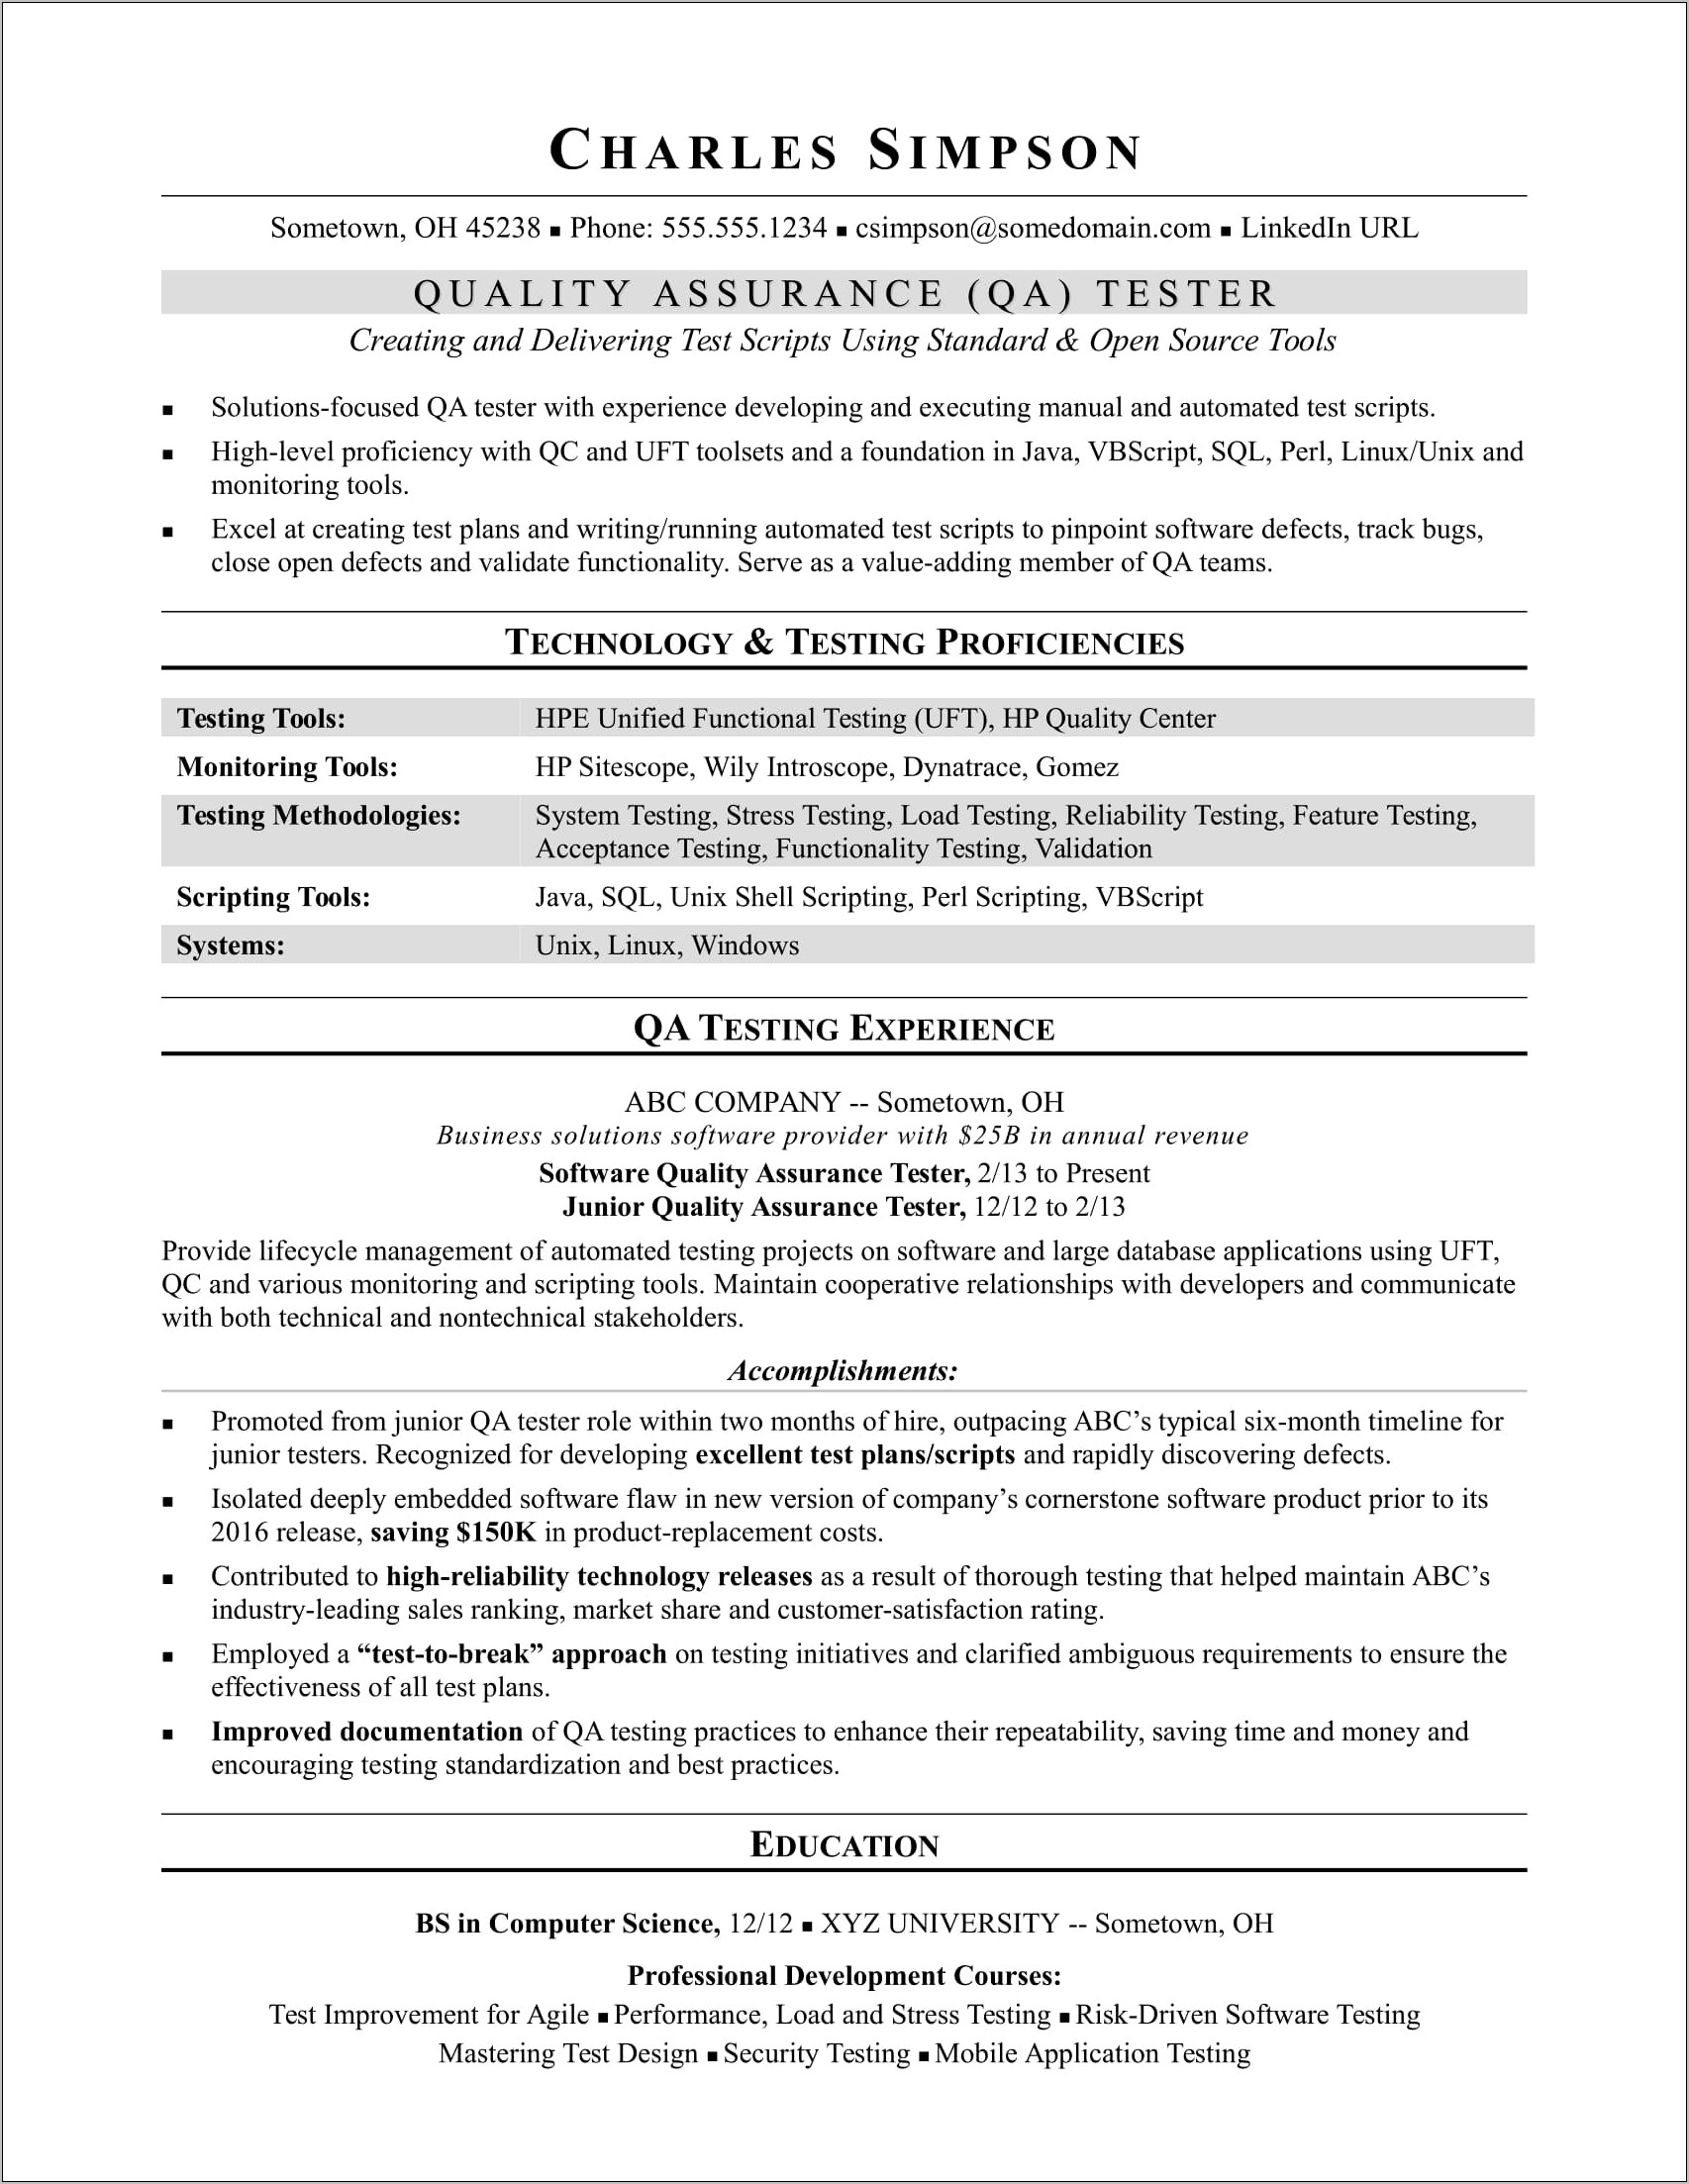 2 Years Automation Testing Experience Resume